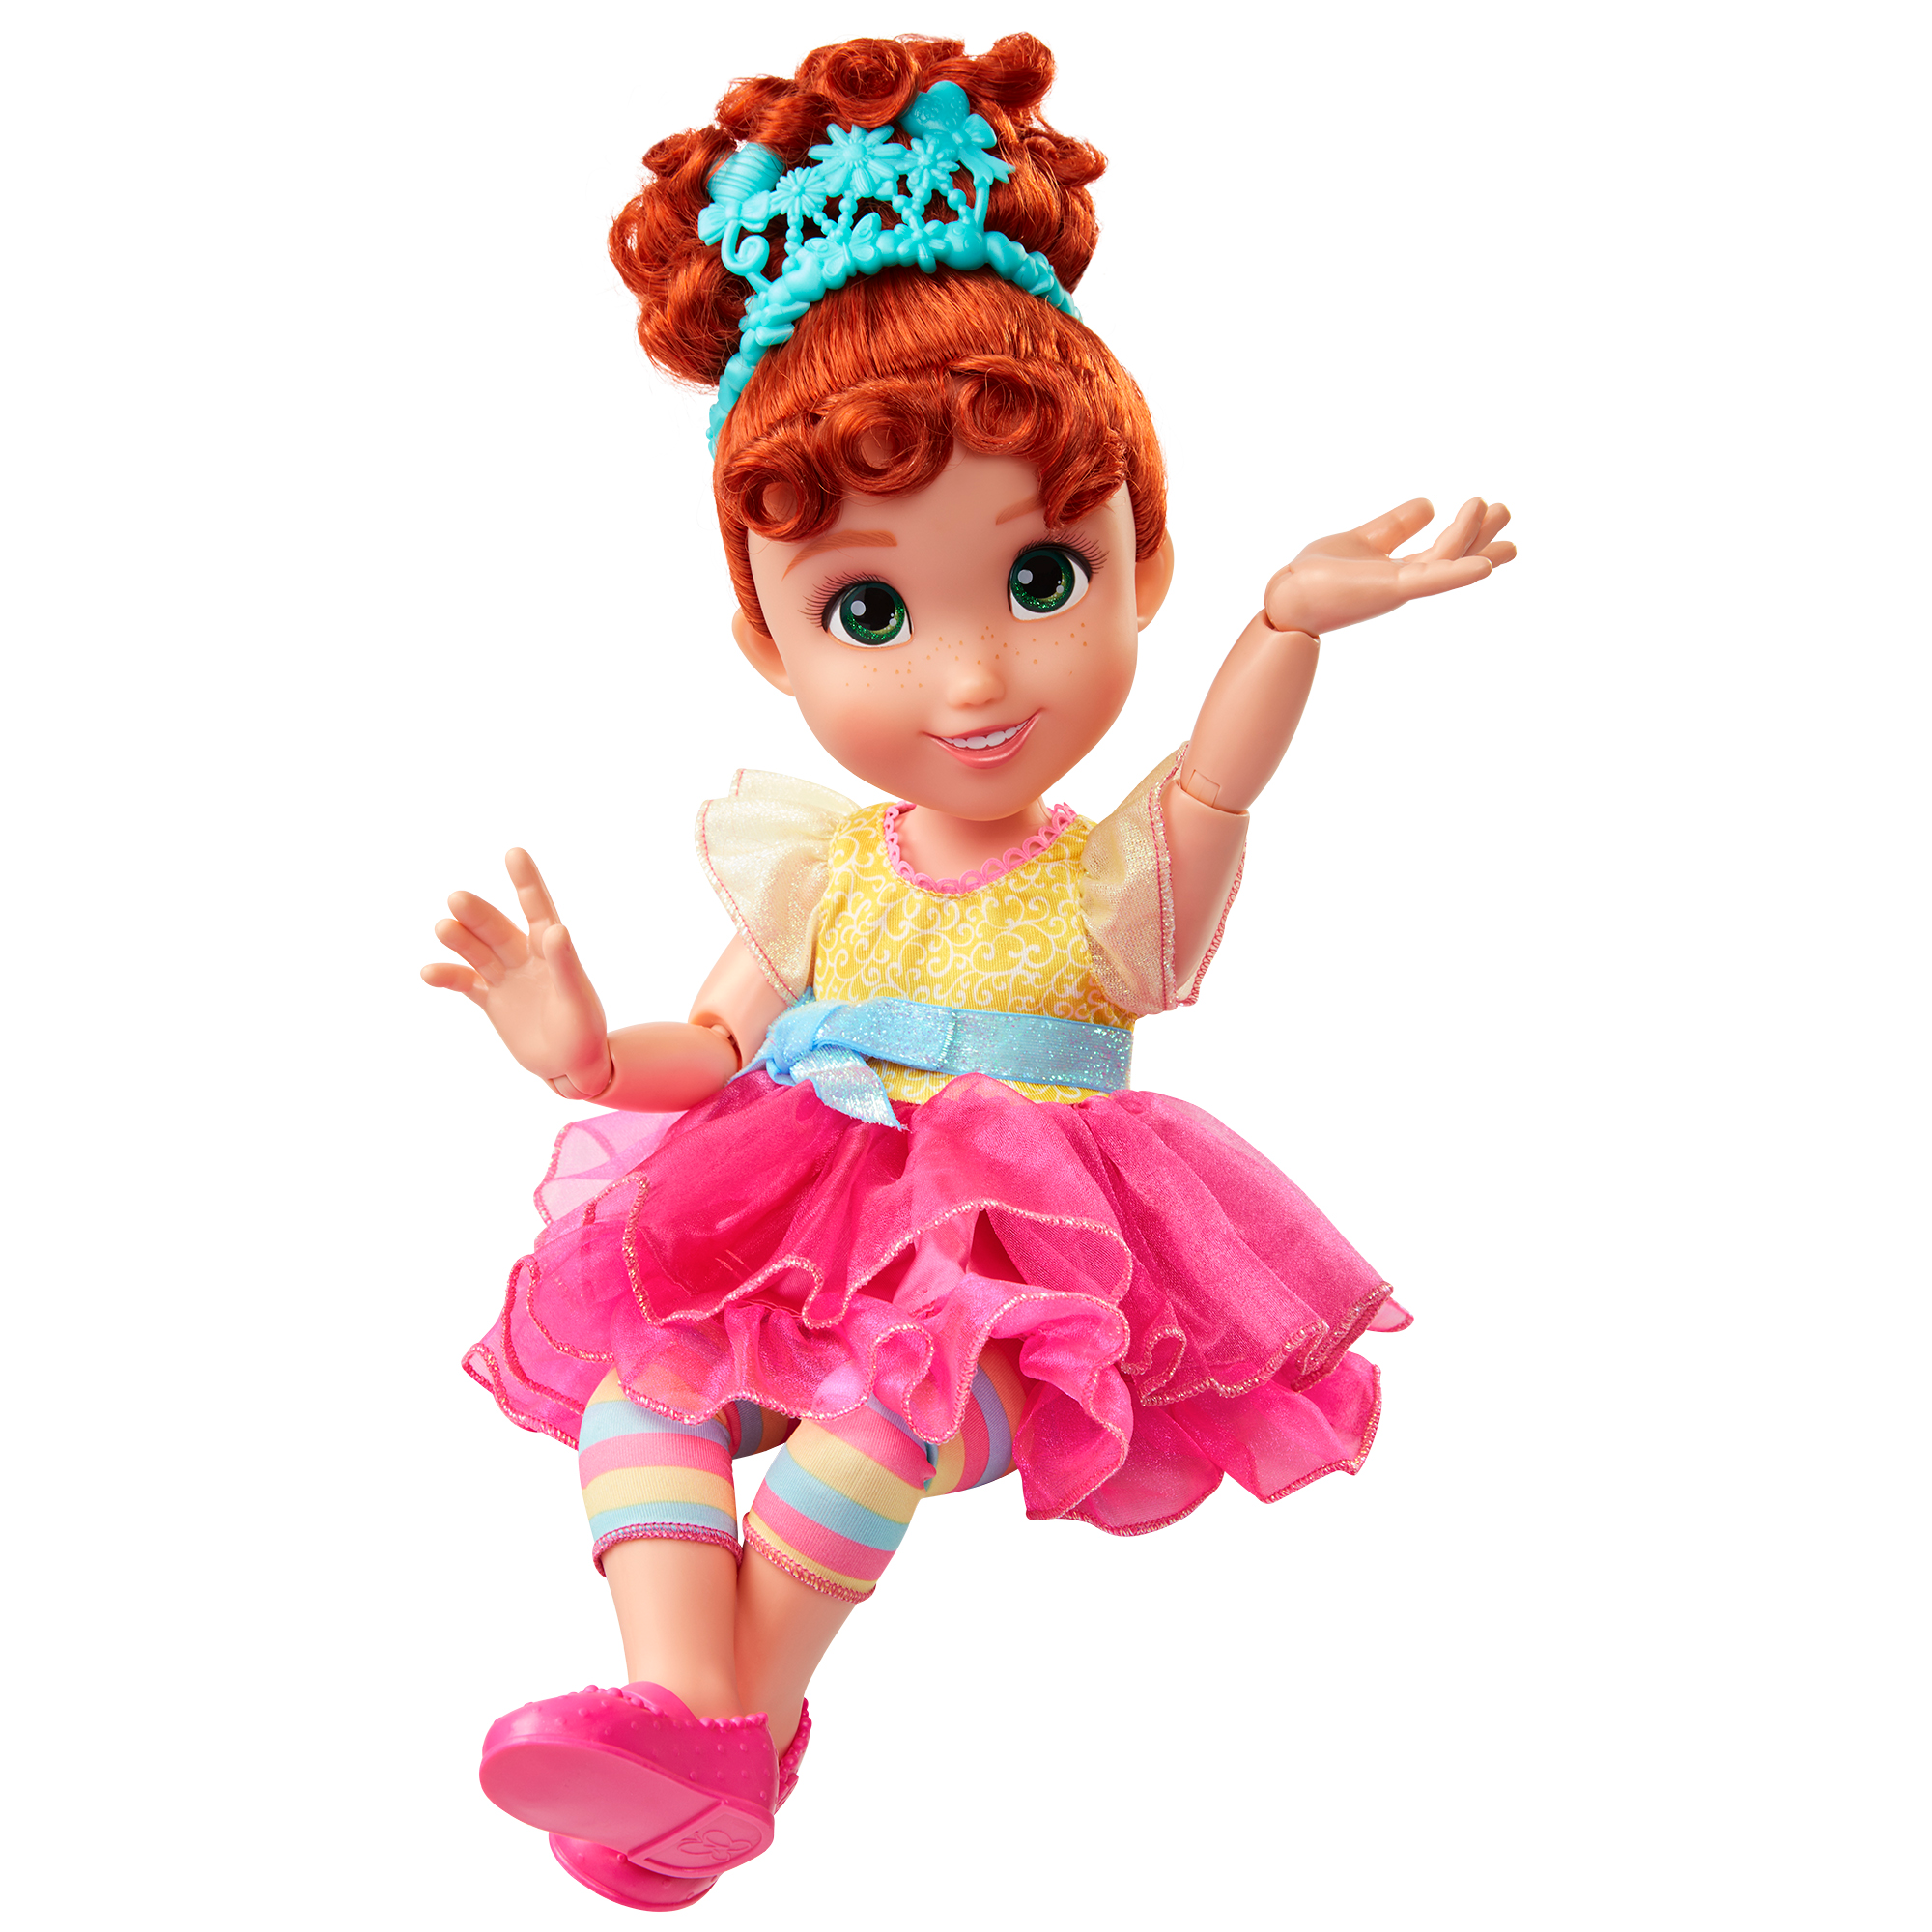 My friend fancy nancy 18" doll in signature outfit - image 2 of 3